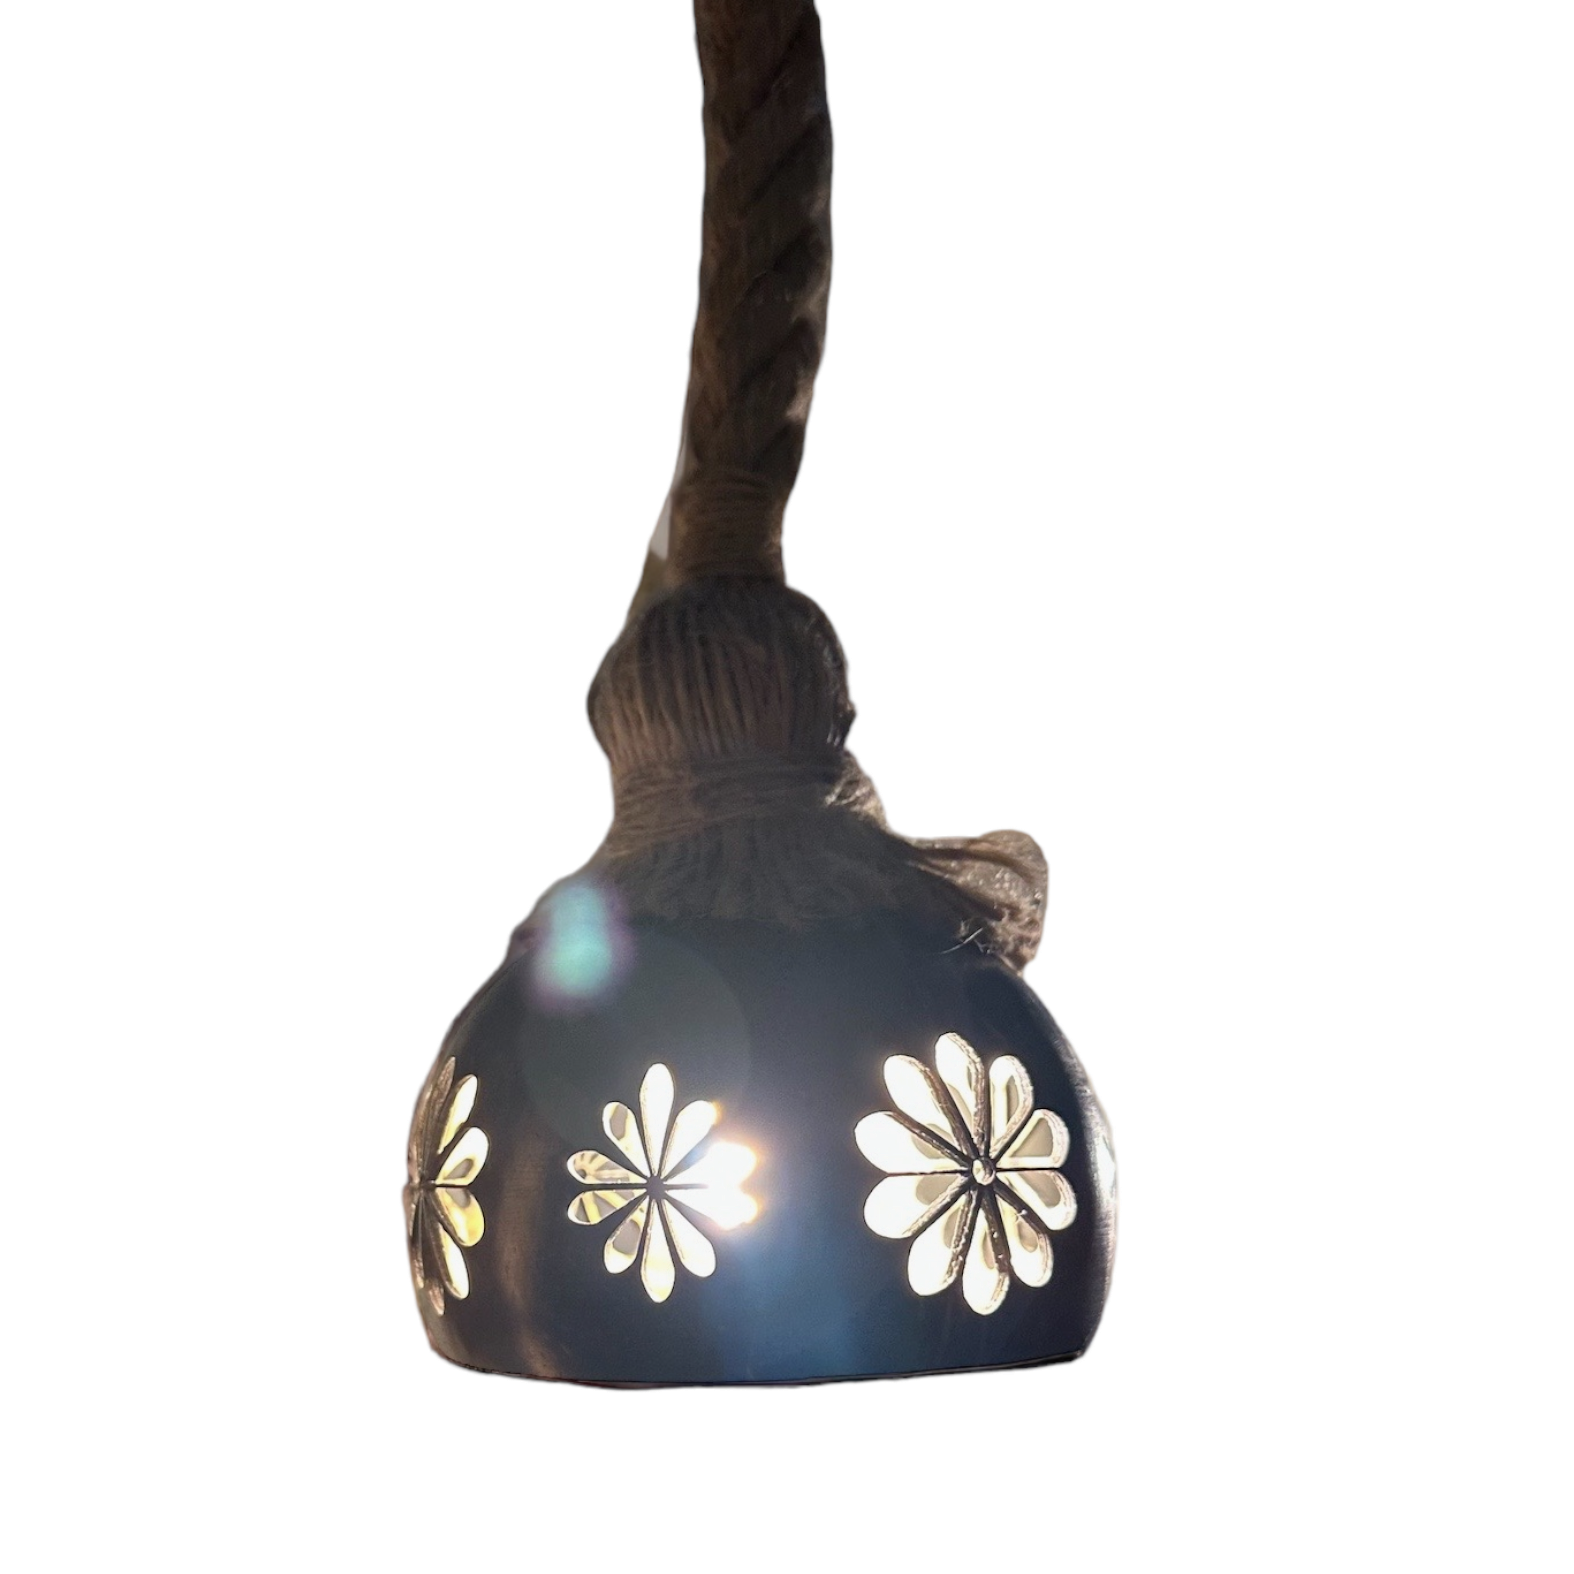 Comorin Coconuts Tropical Twilight Canopy: 1 Meter Dark Floral Coconut Shell Ceiling Hanging Lamp